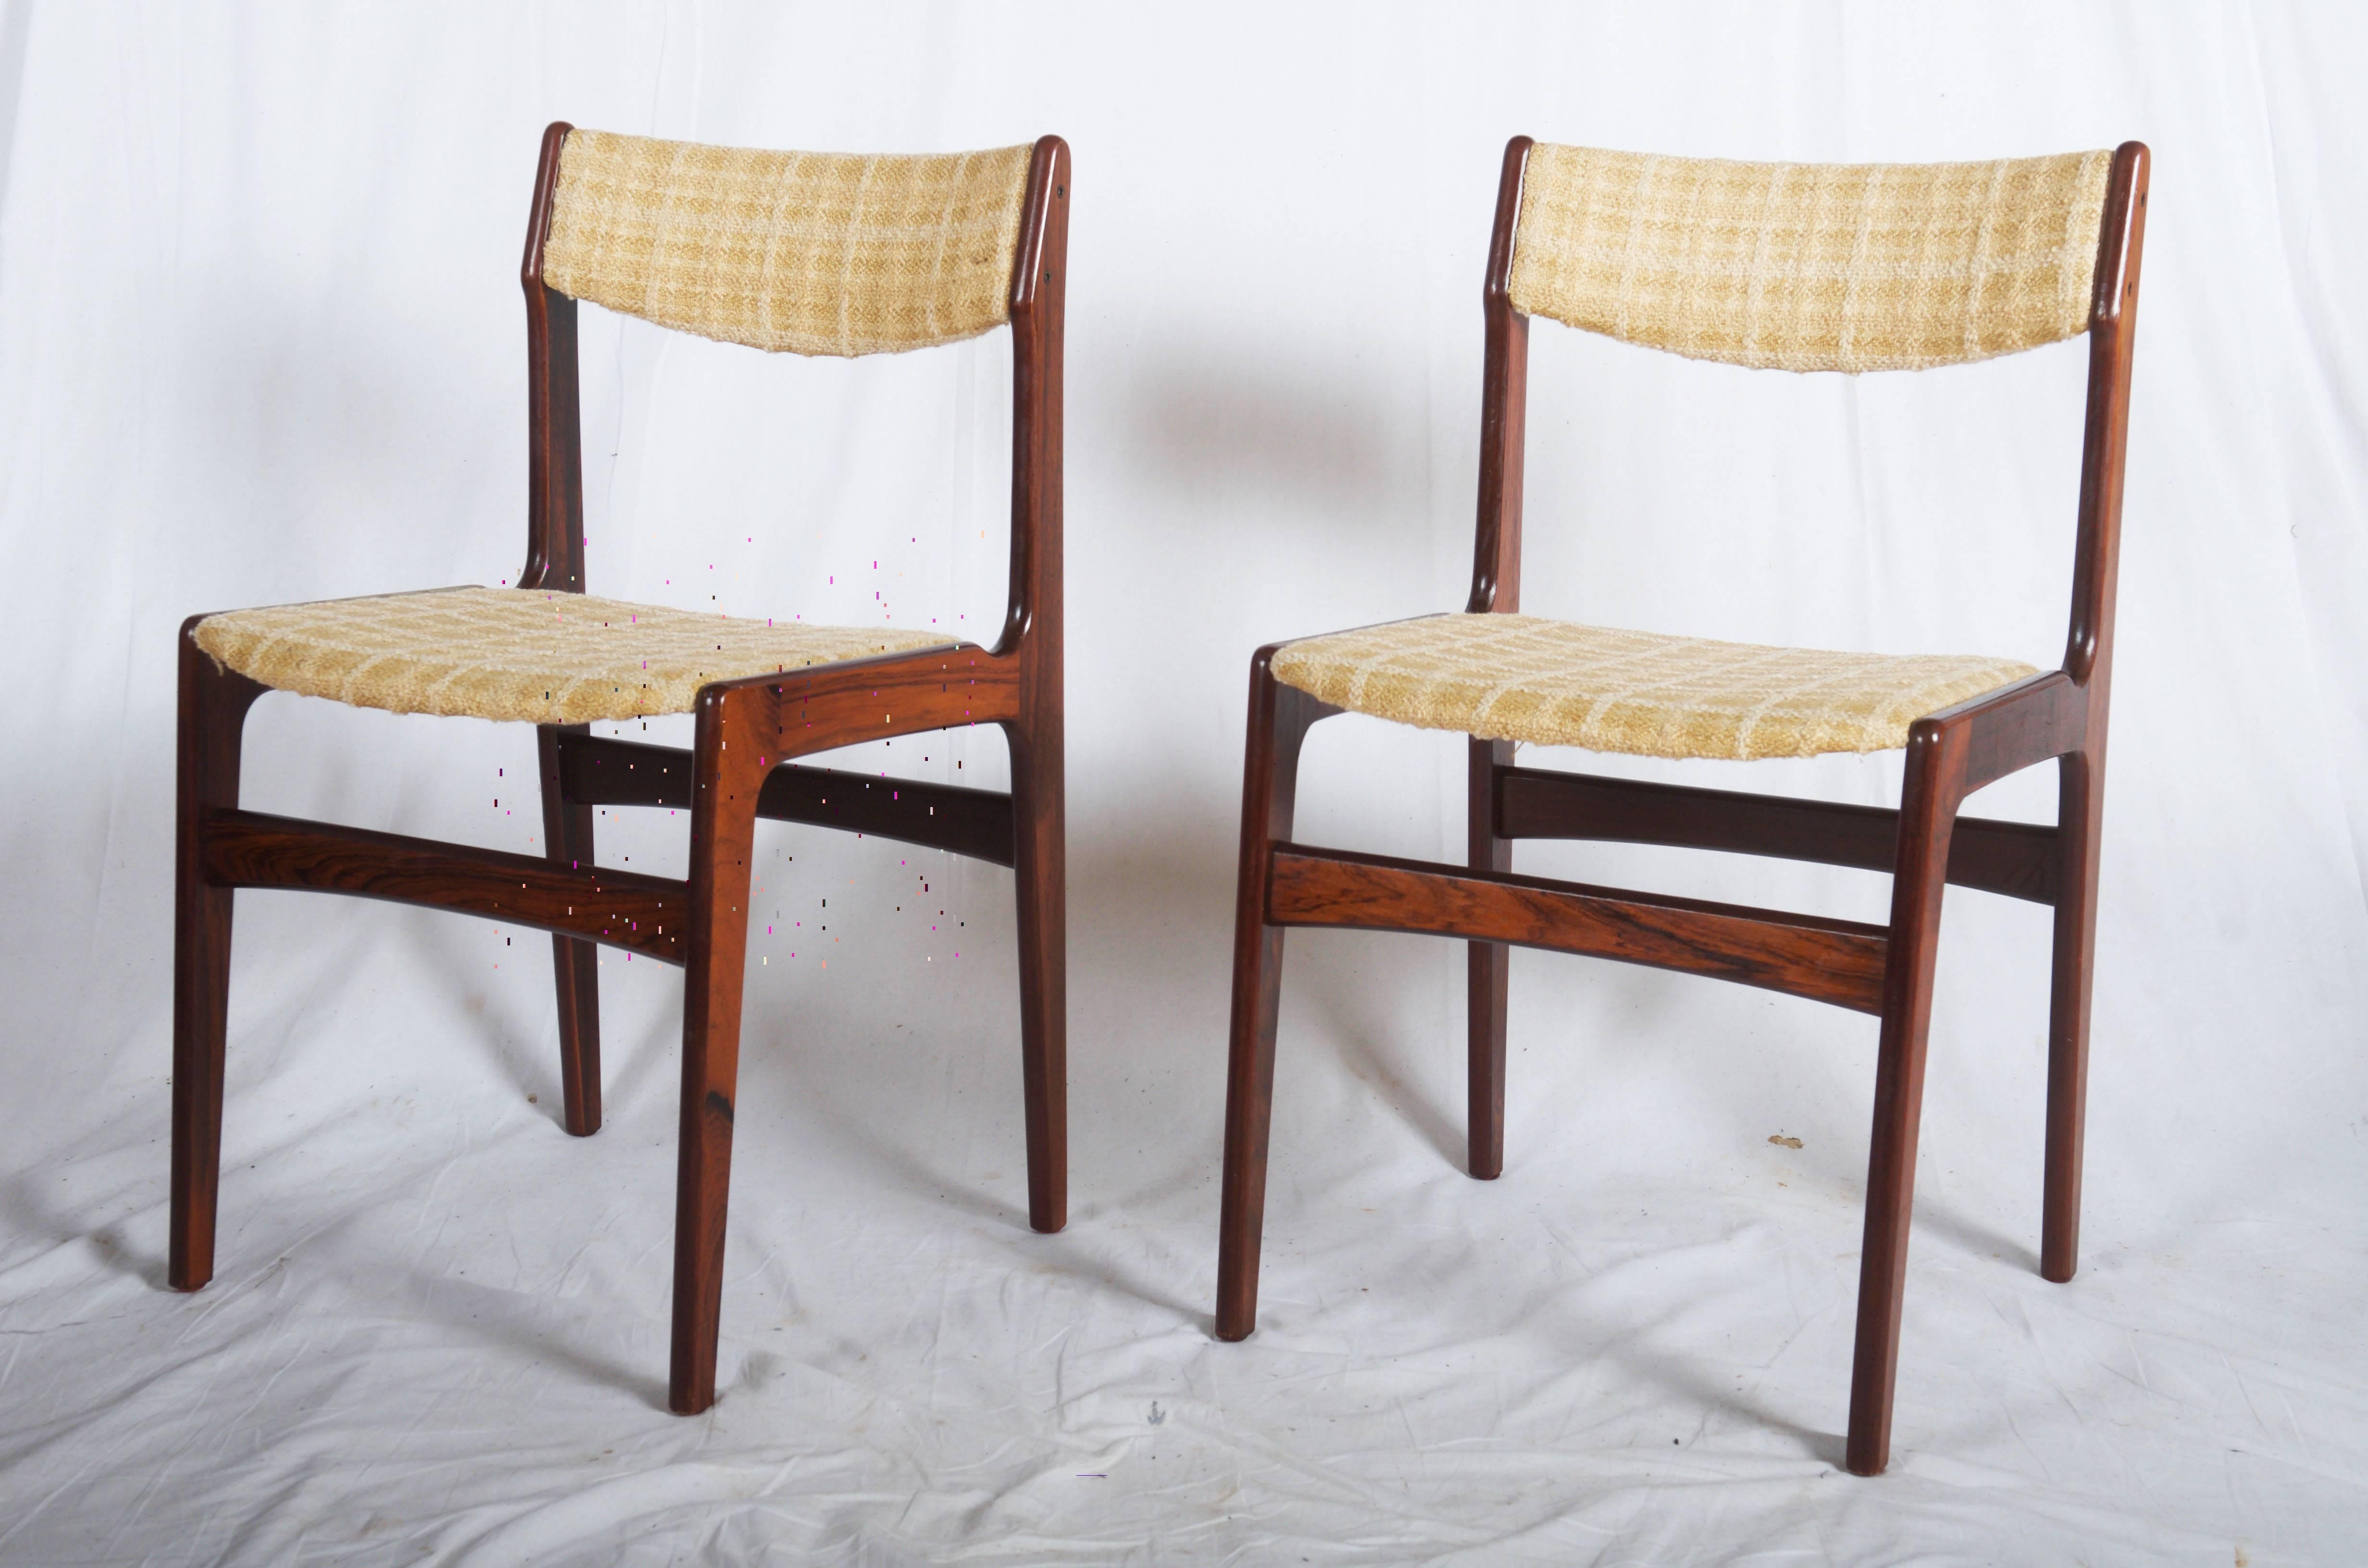 Set of six Danish dining chairs in hardwood veneer from the late 1970s, by unknown designer but very similar to model 49 by Eric Buck.
Padded seat and back. 
Chairs are unrestored, restoration and upholstery will be done before shipment.
Price for